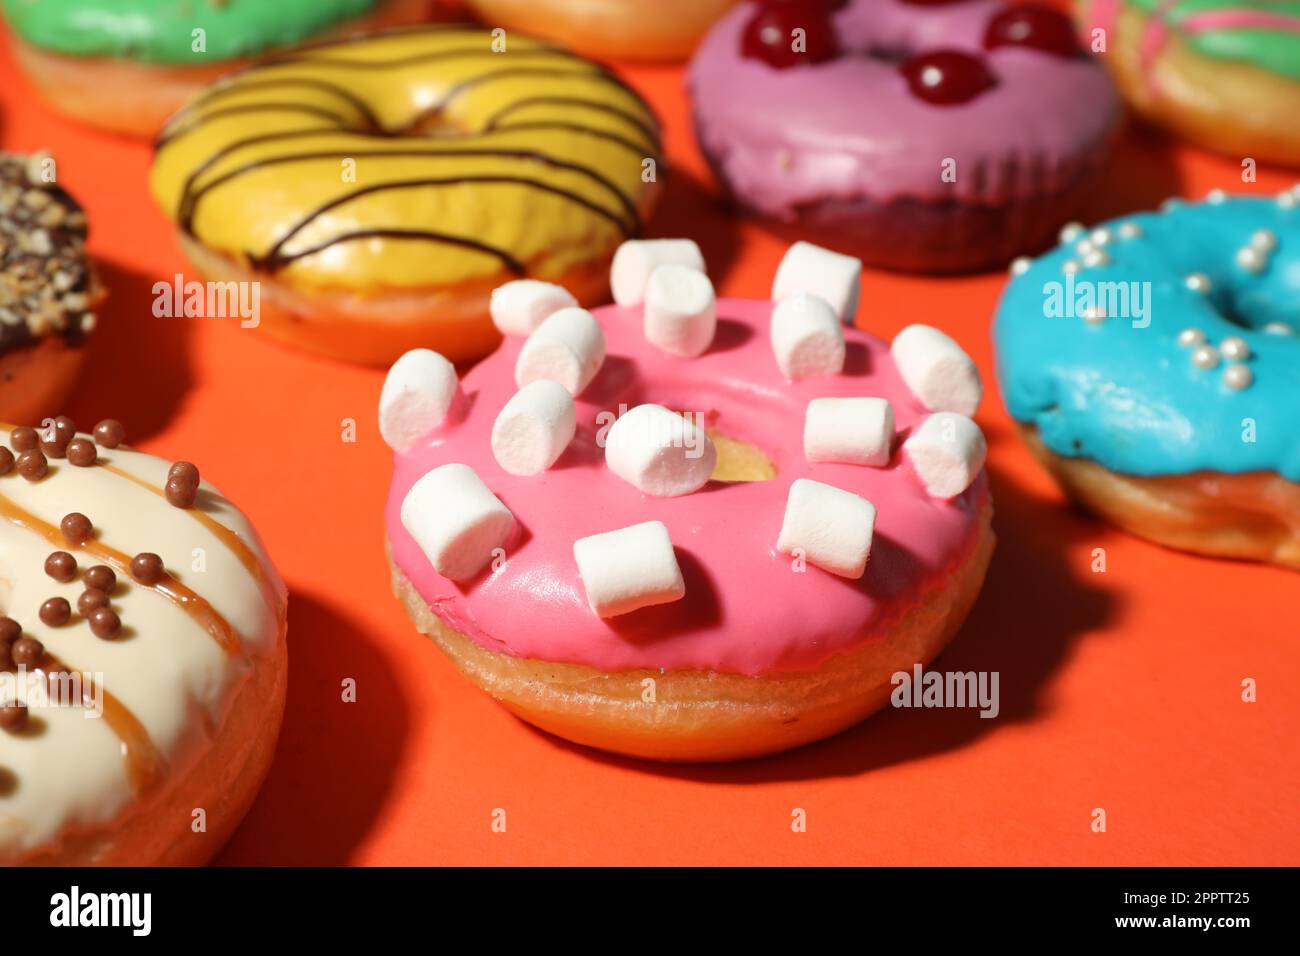 Sweet tasty glazed donuts on coral background, closeup Stock Photo